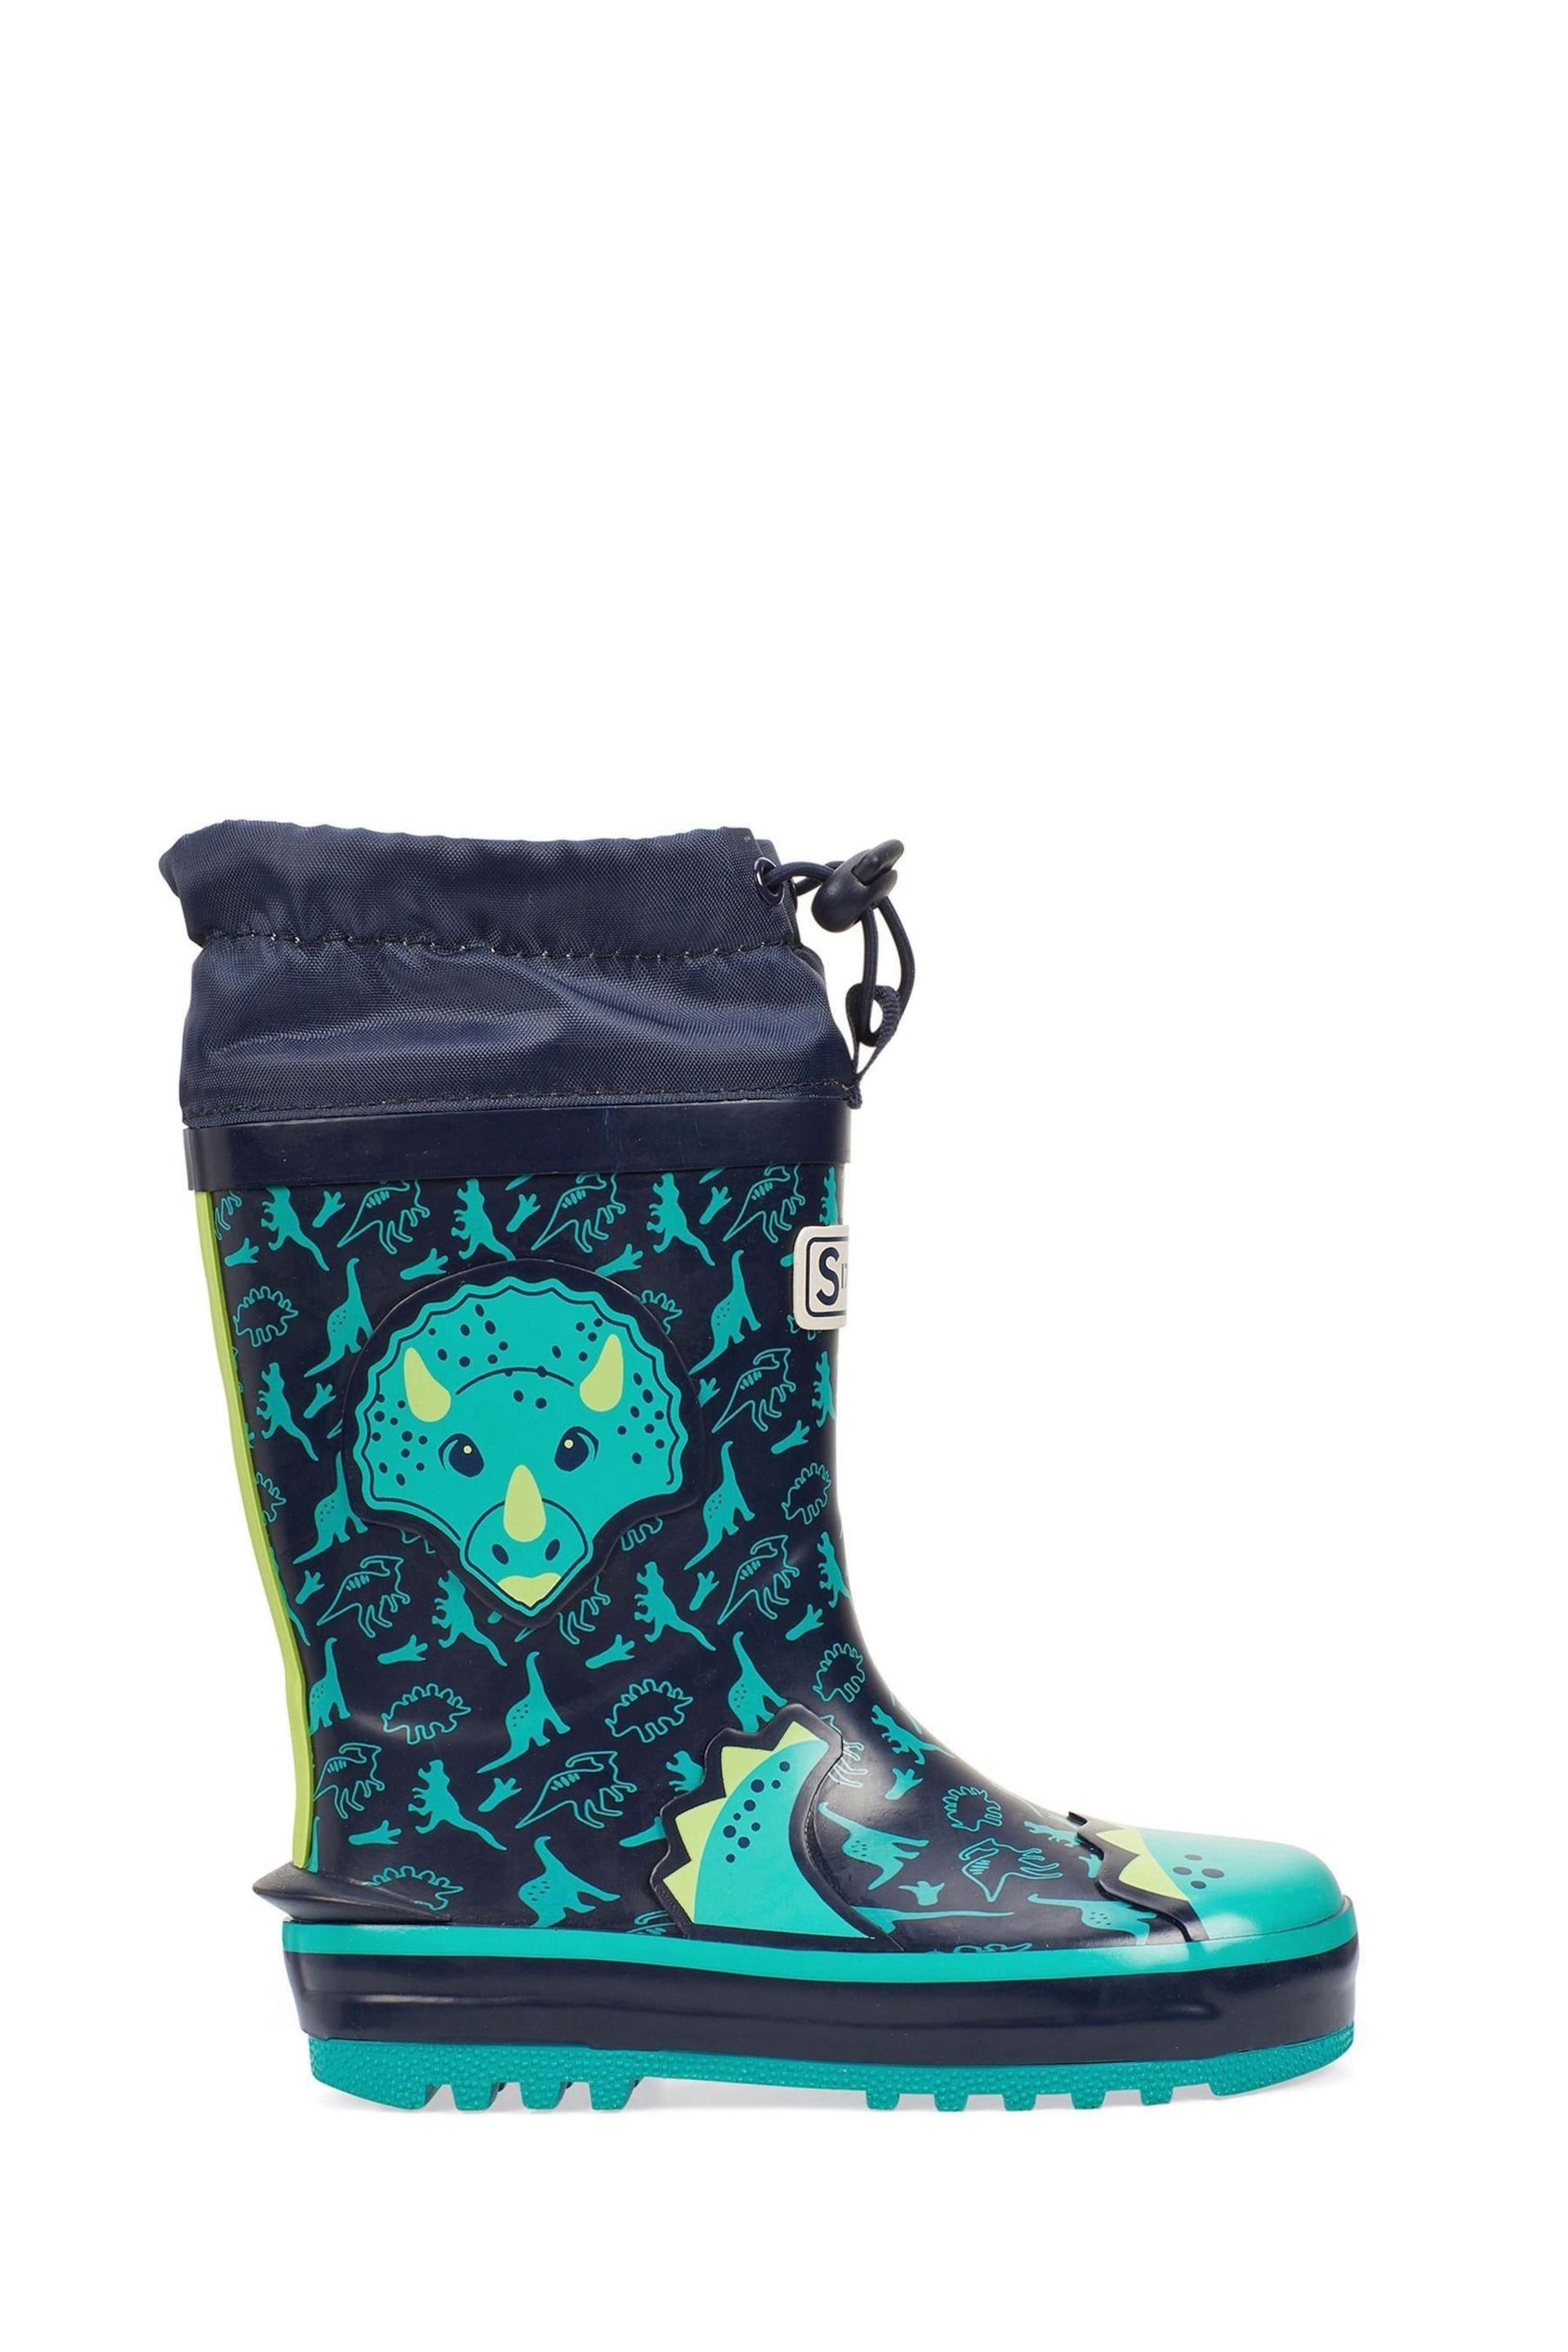 Start Rite Little Puddle Tie Top Cosy Wellies - Image 1 of 6